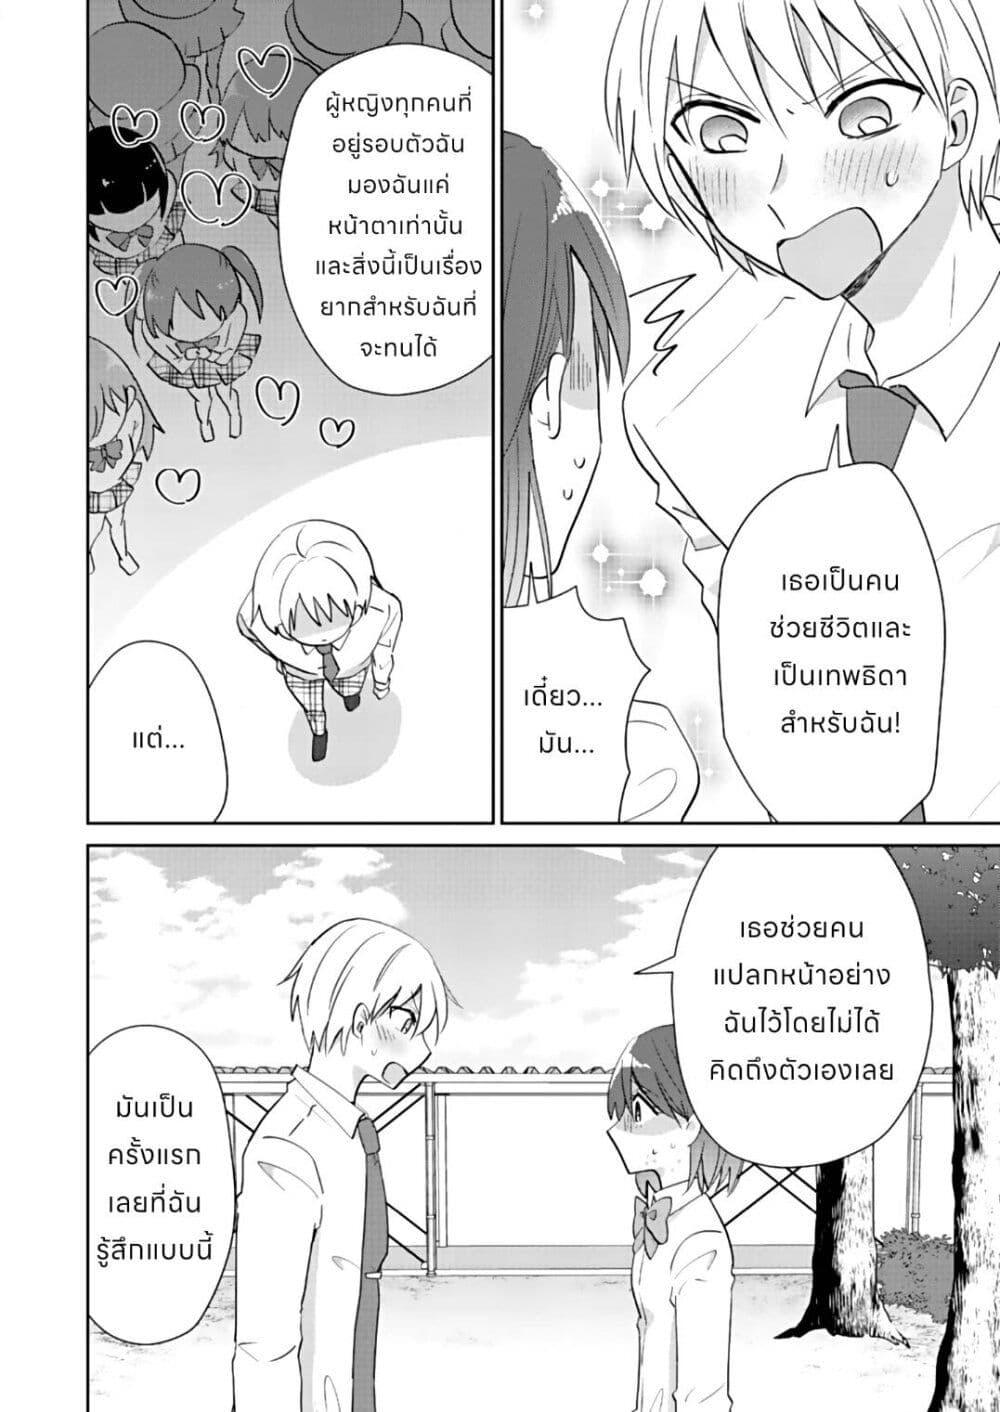 How to Start a Relationship With Crossdressing ตอนที่ 1.2 (10)